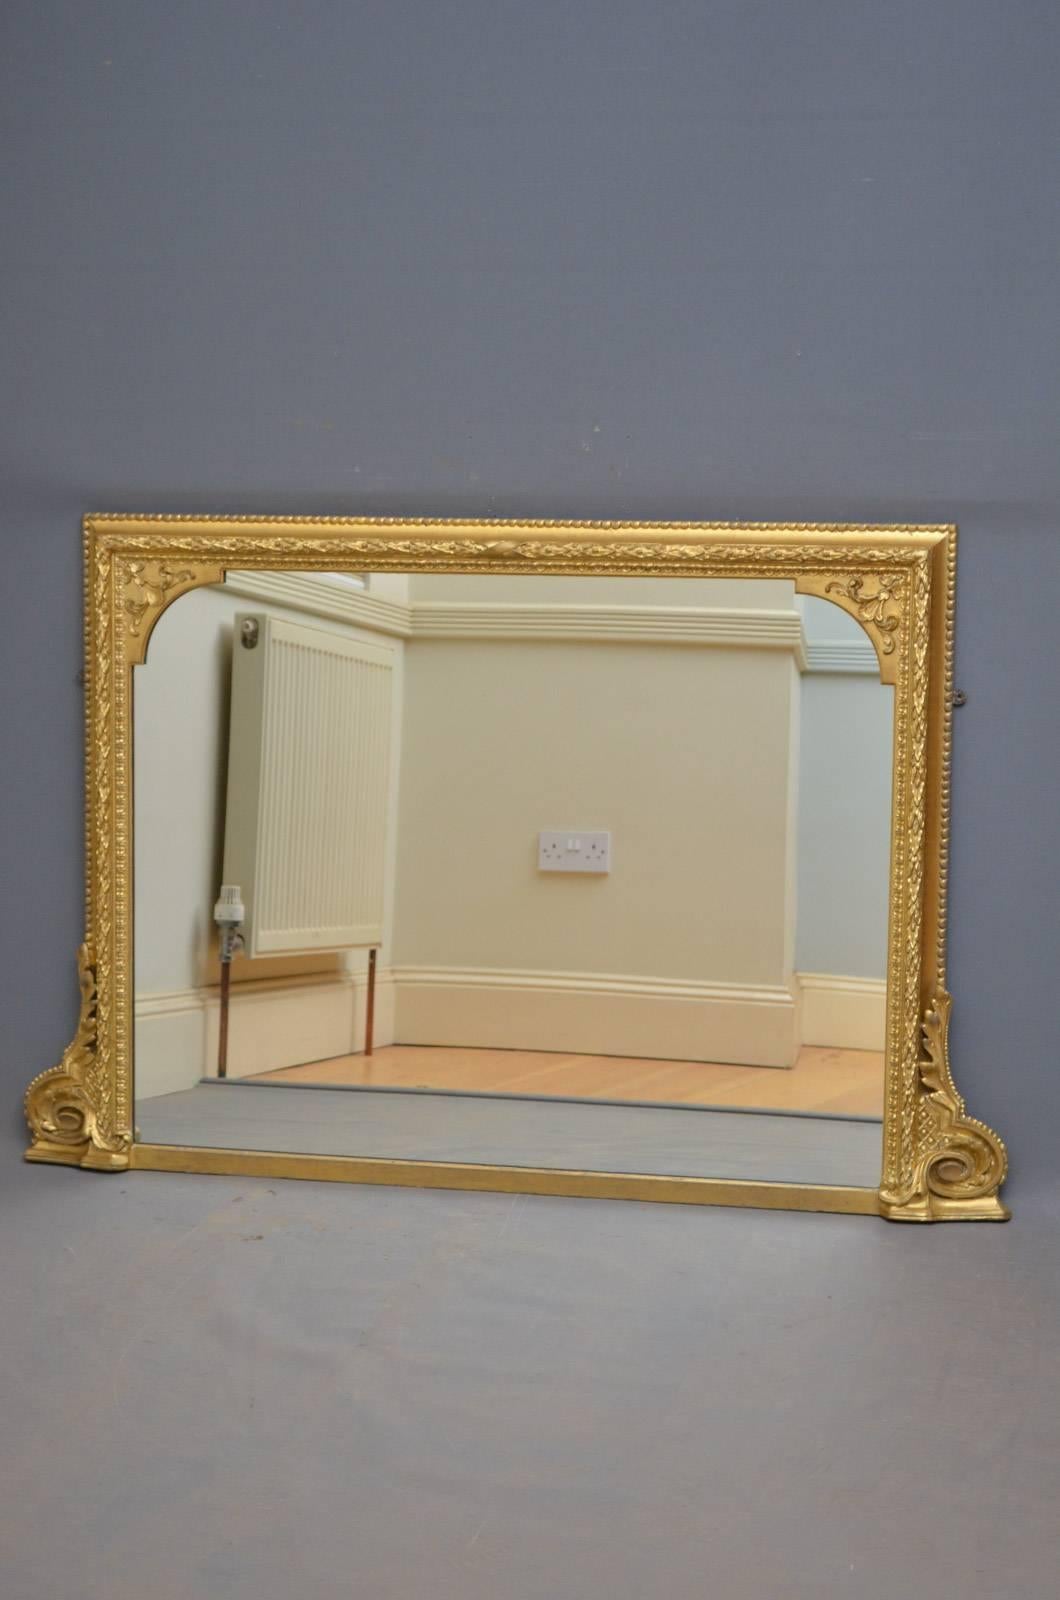 J00 fine and elegant Victorian gilded mirror of horizontal form, having original mirror plate with some imperfections in finely carved and decorated frame. All in wonderful original condition throughout. circa 1860
Measures: H 33